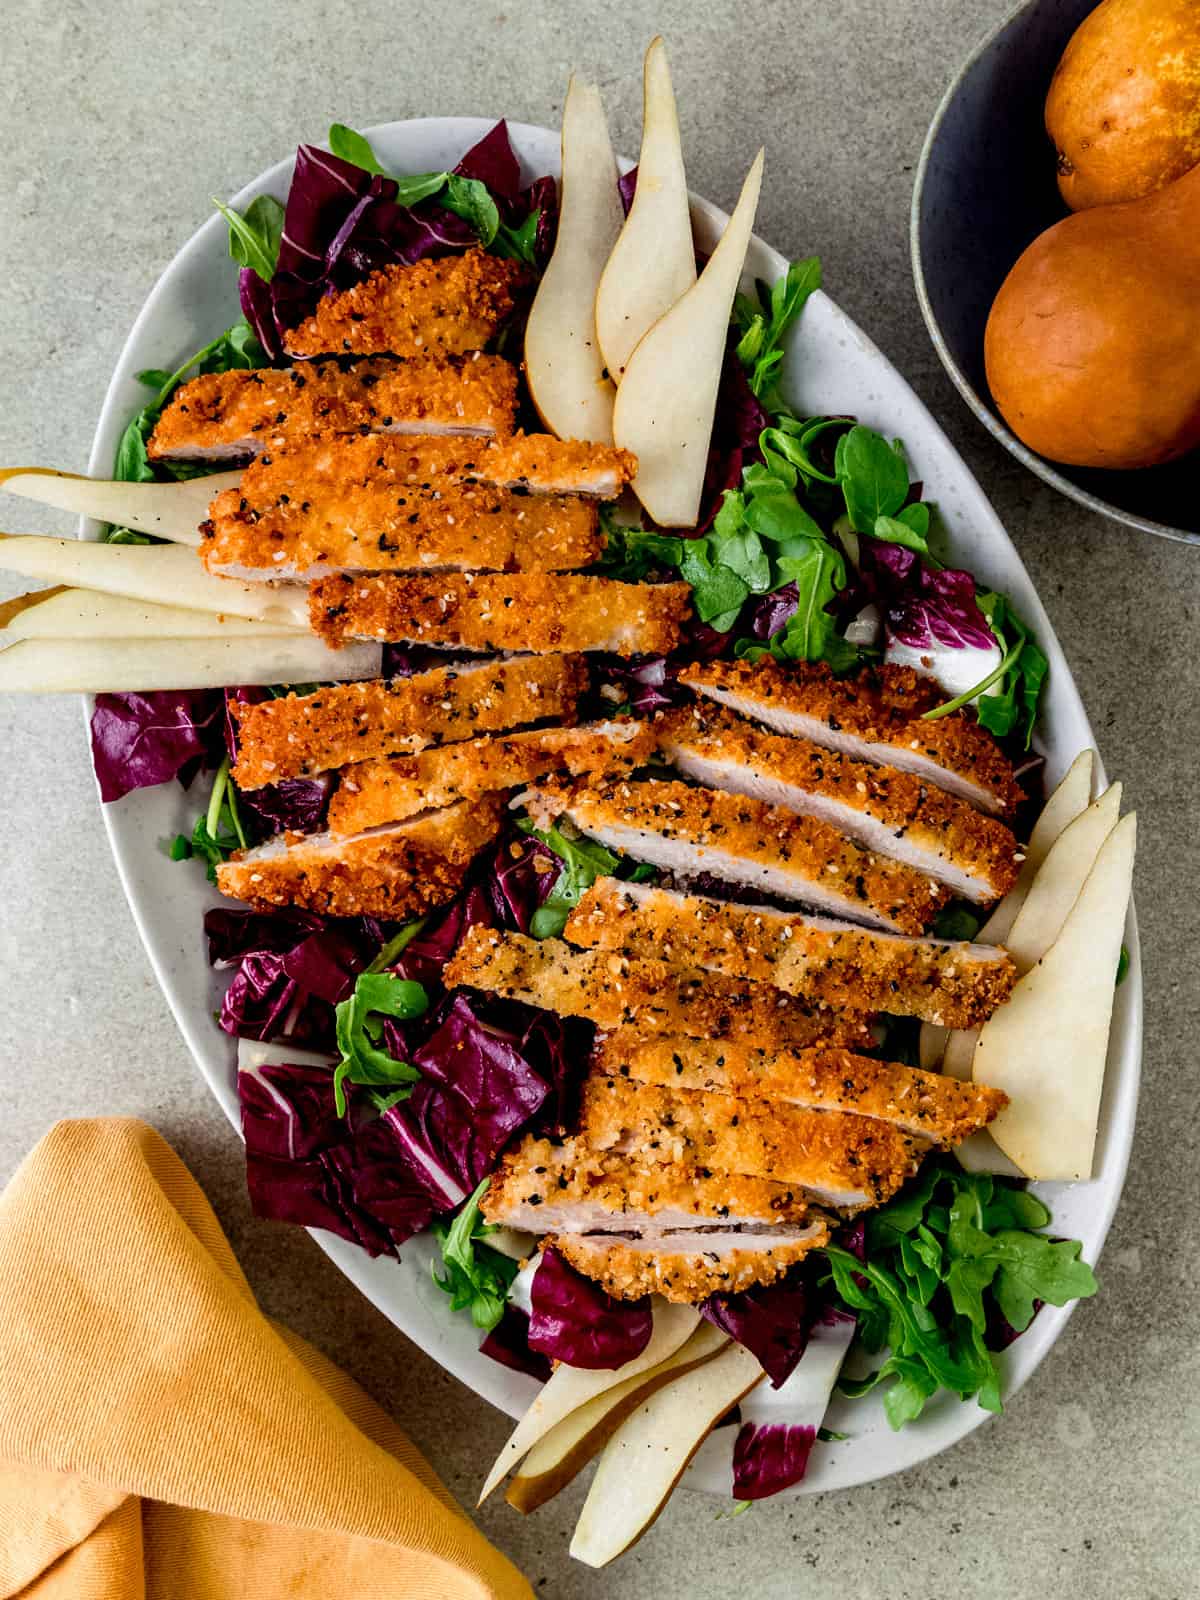 Everything spiced chicken cutlets with radicchio and pear salad.